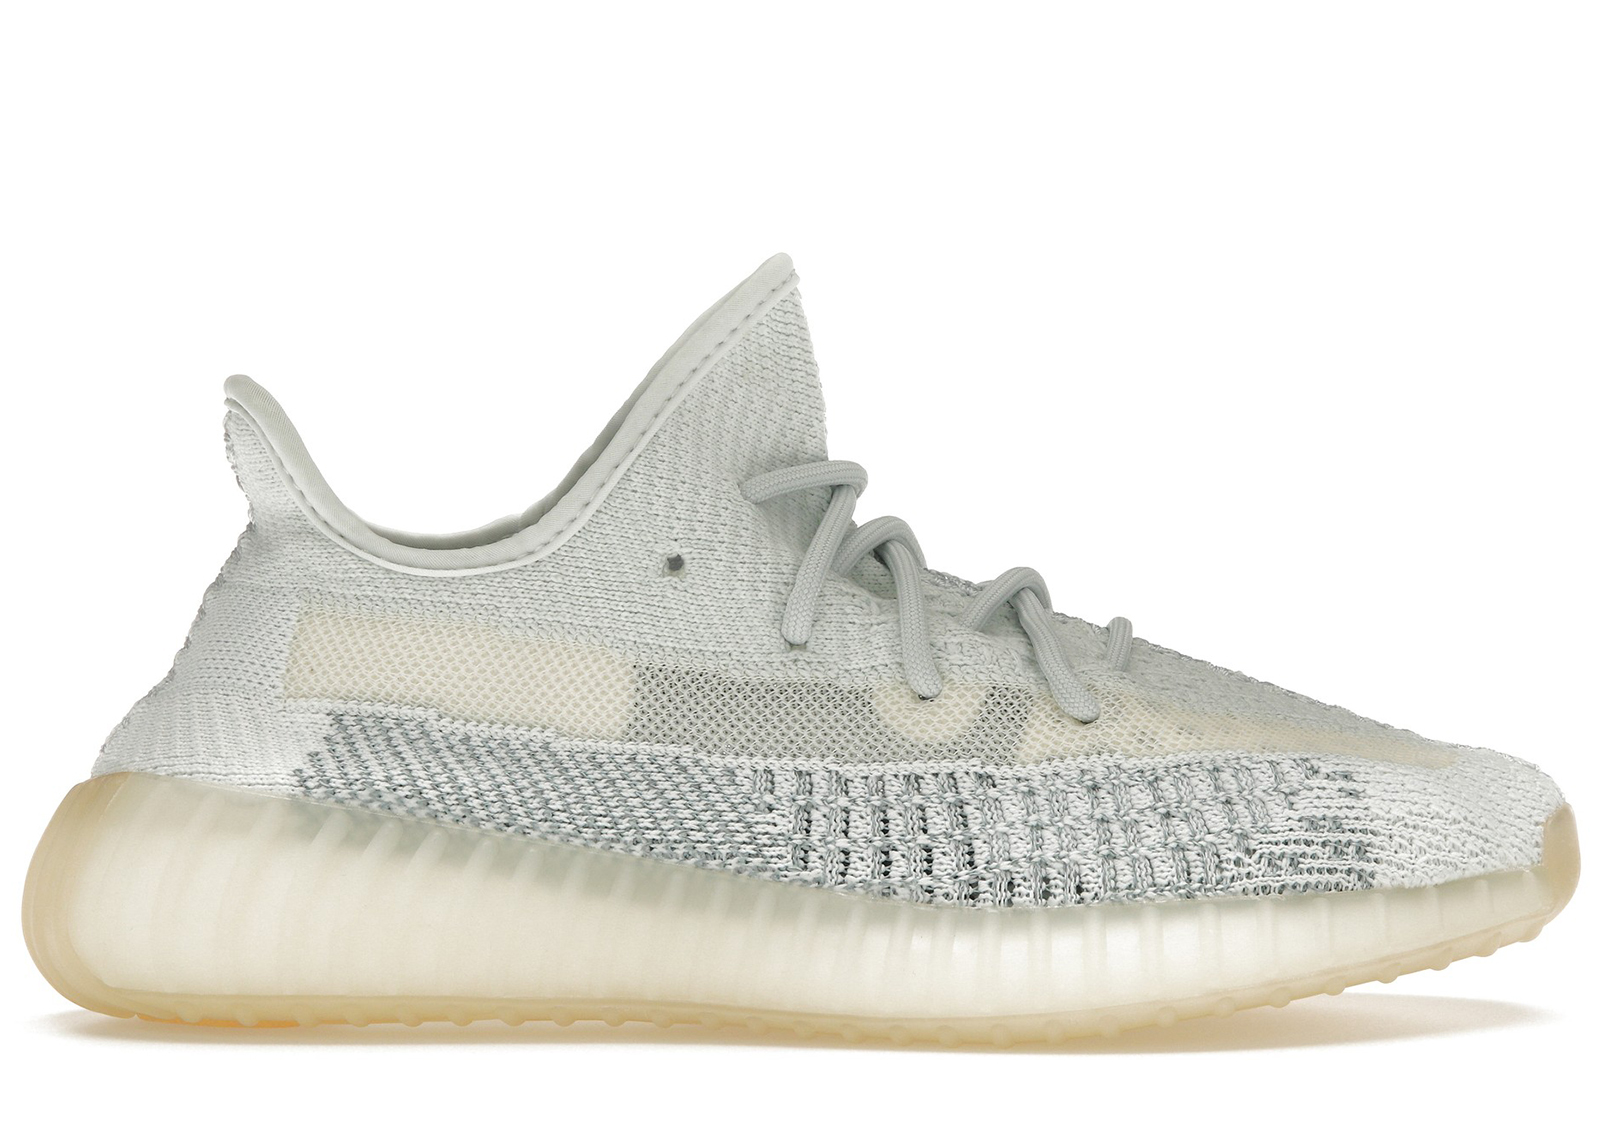 adidas Yeezy Boost 350 V2 Cloud White (Reflective) Men's - FW5317 - US